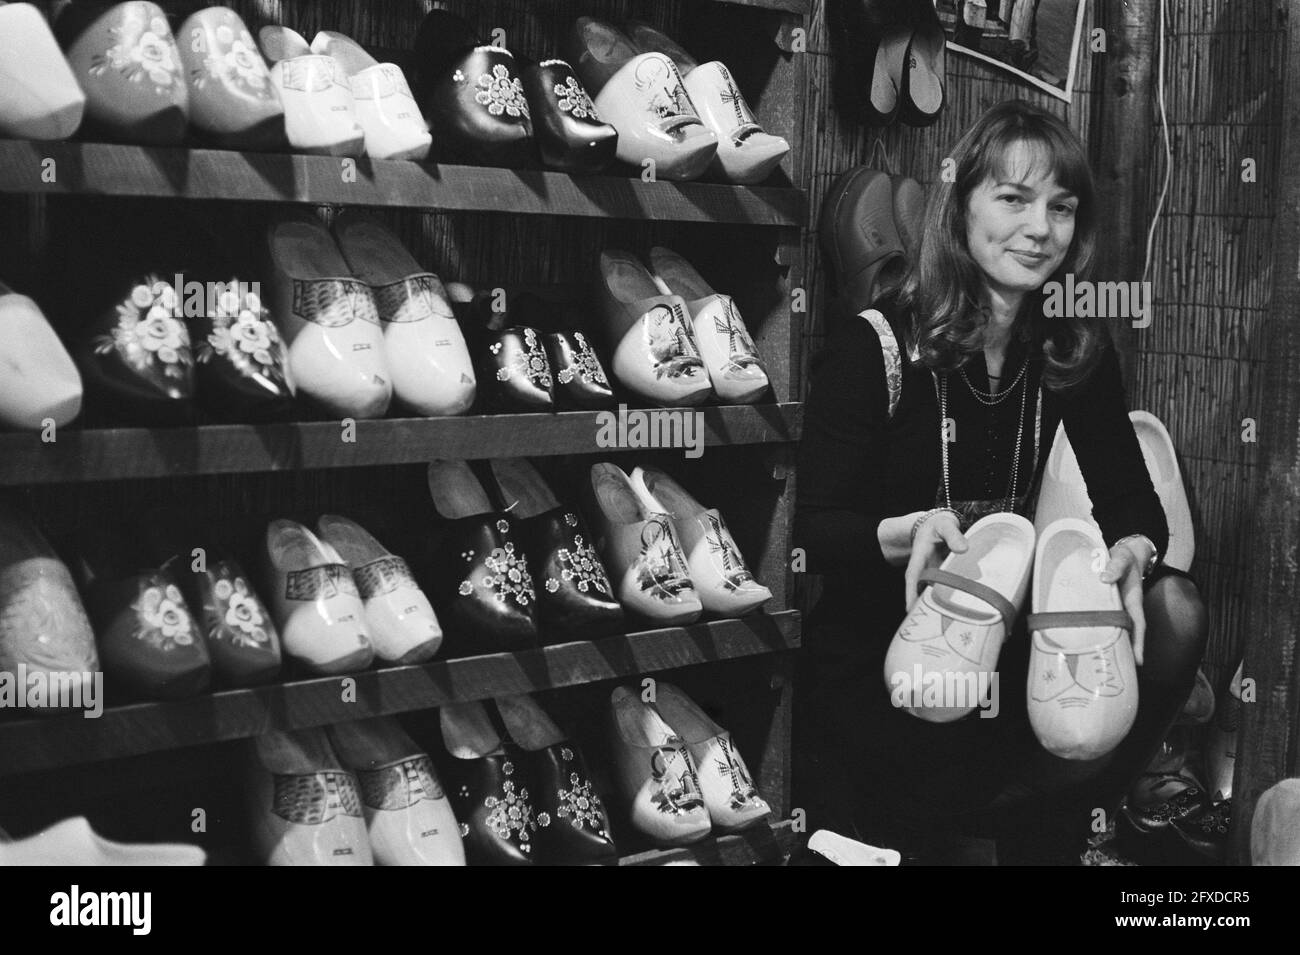 Souvenirs fair in Jaarbeurs; girl at rack of clogs, January 10, 1977, CLOTHING, girls, The Netherlands, 20th century press agency photo, news to remember, documentary, historic photography 1945-1990, visual stories, human history of the Twentieth Century, capturing moments in time Stock Photo